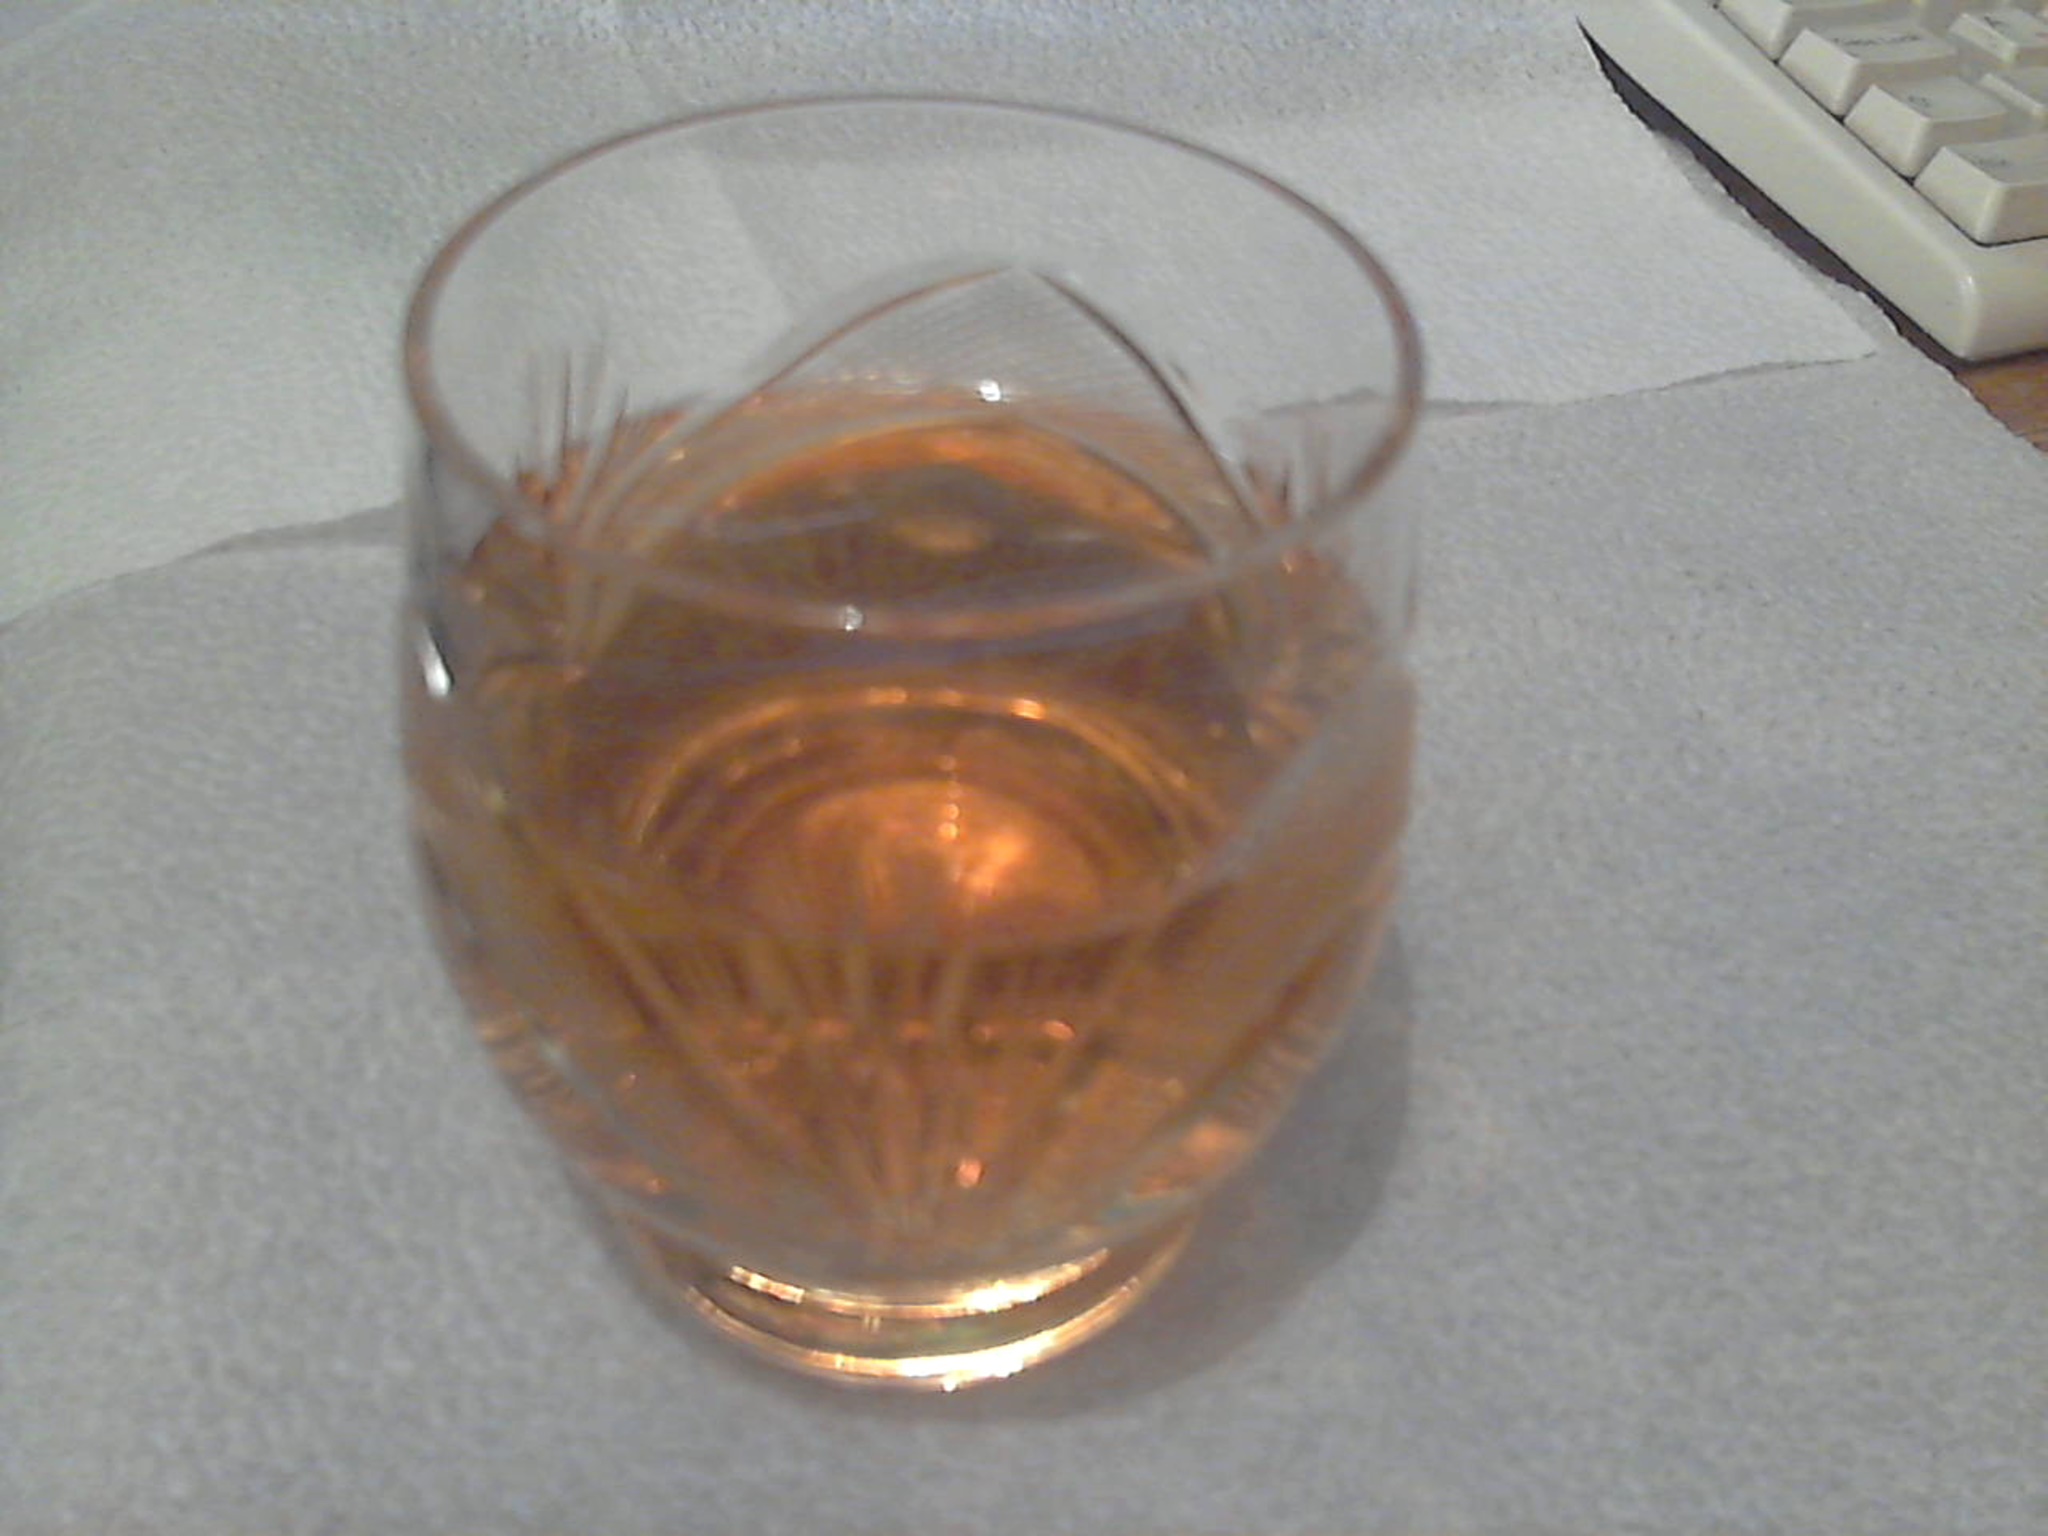 A Glass of Whiskey on New Years Eve